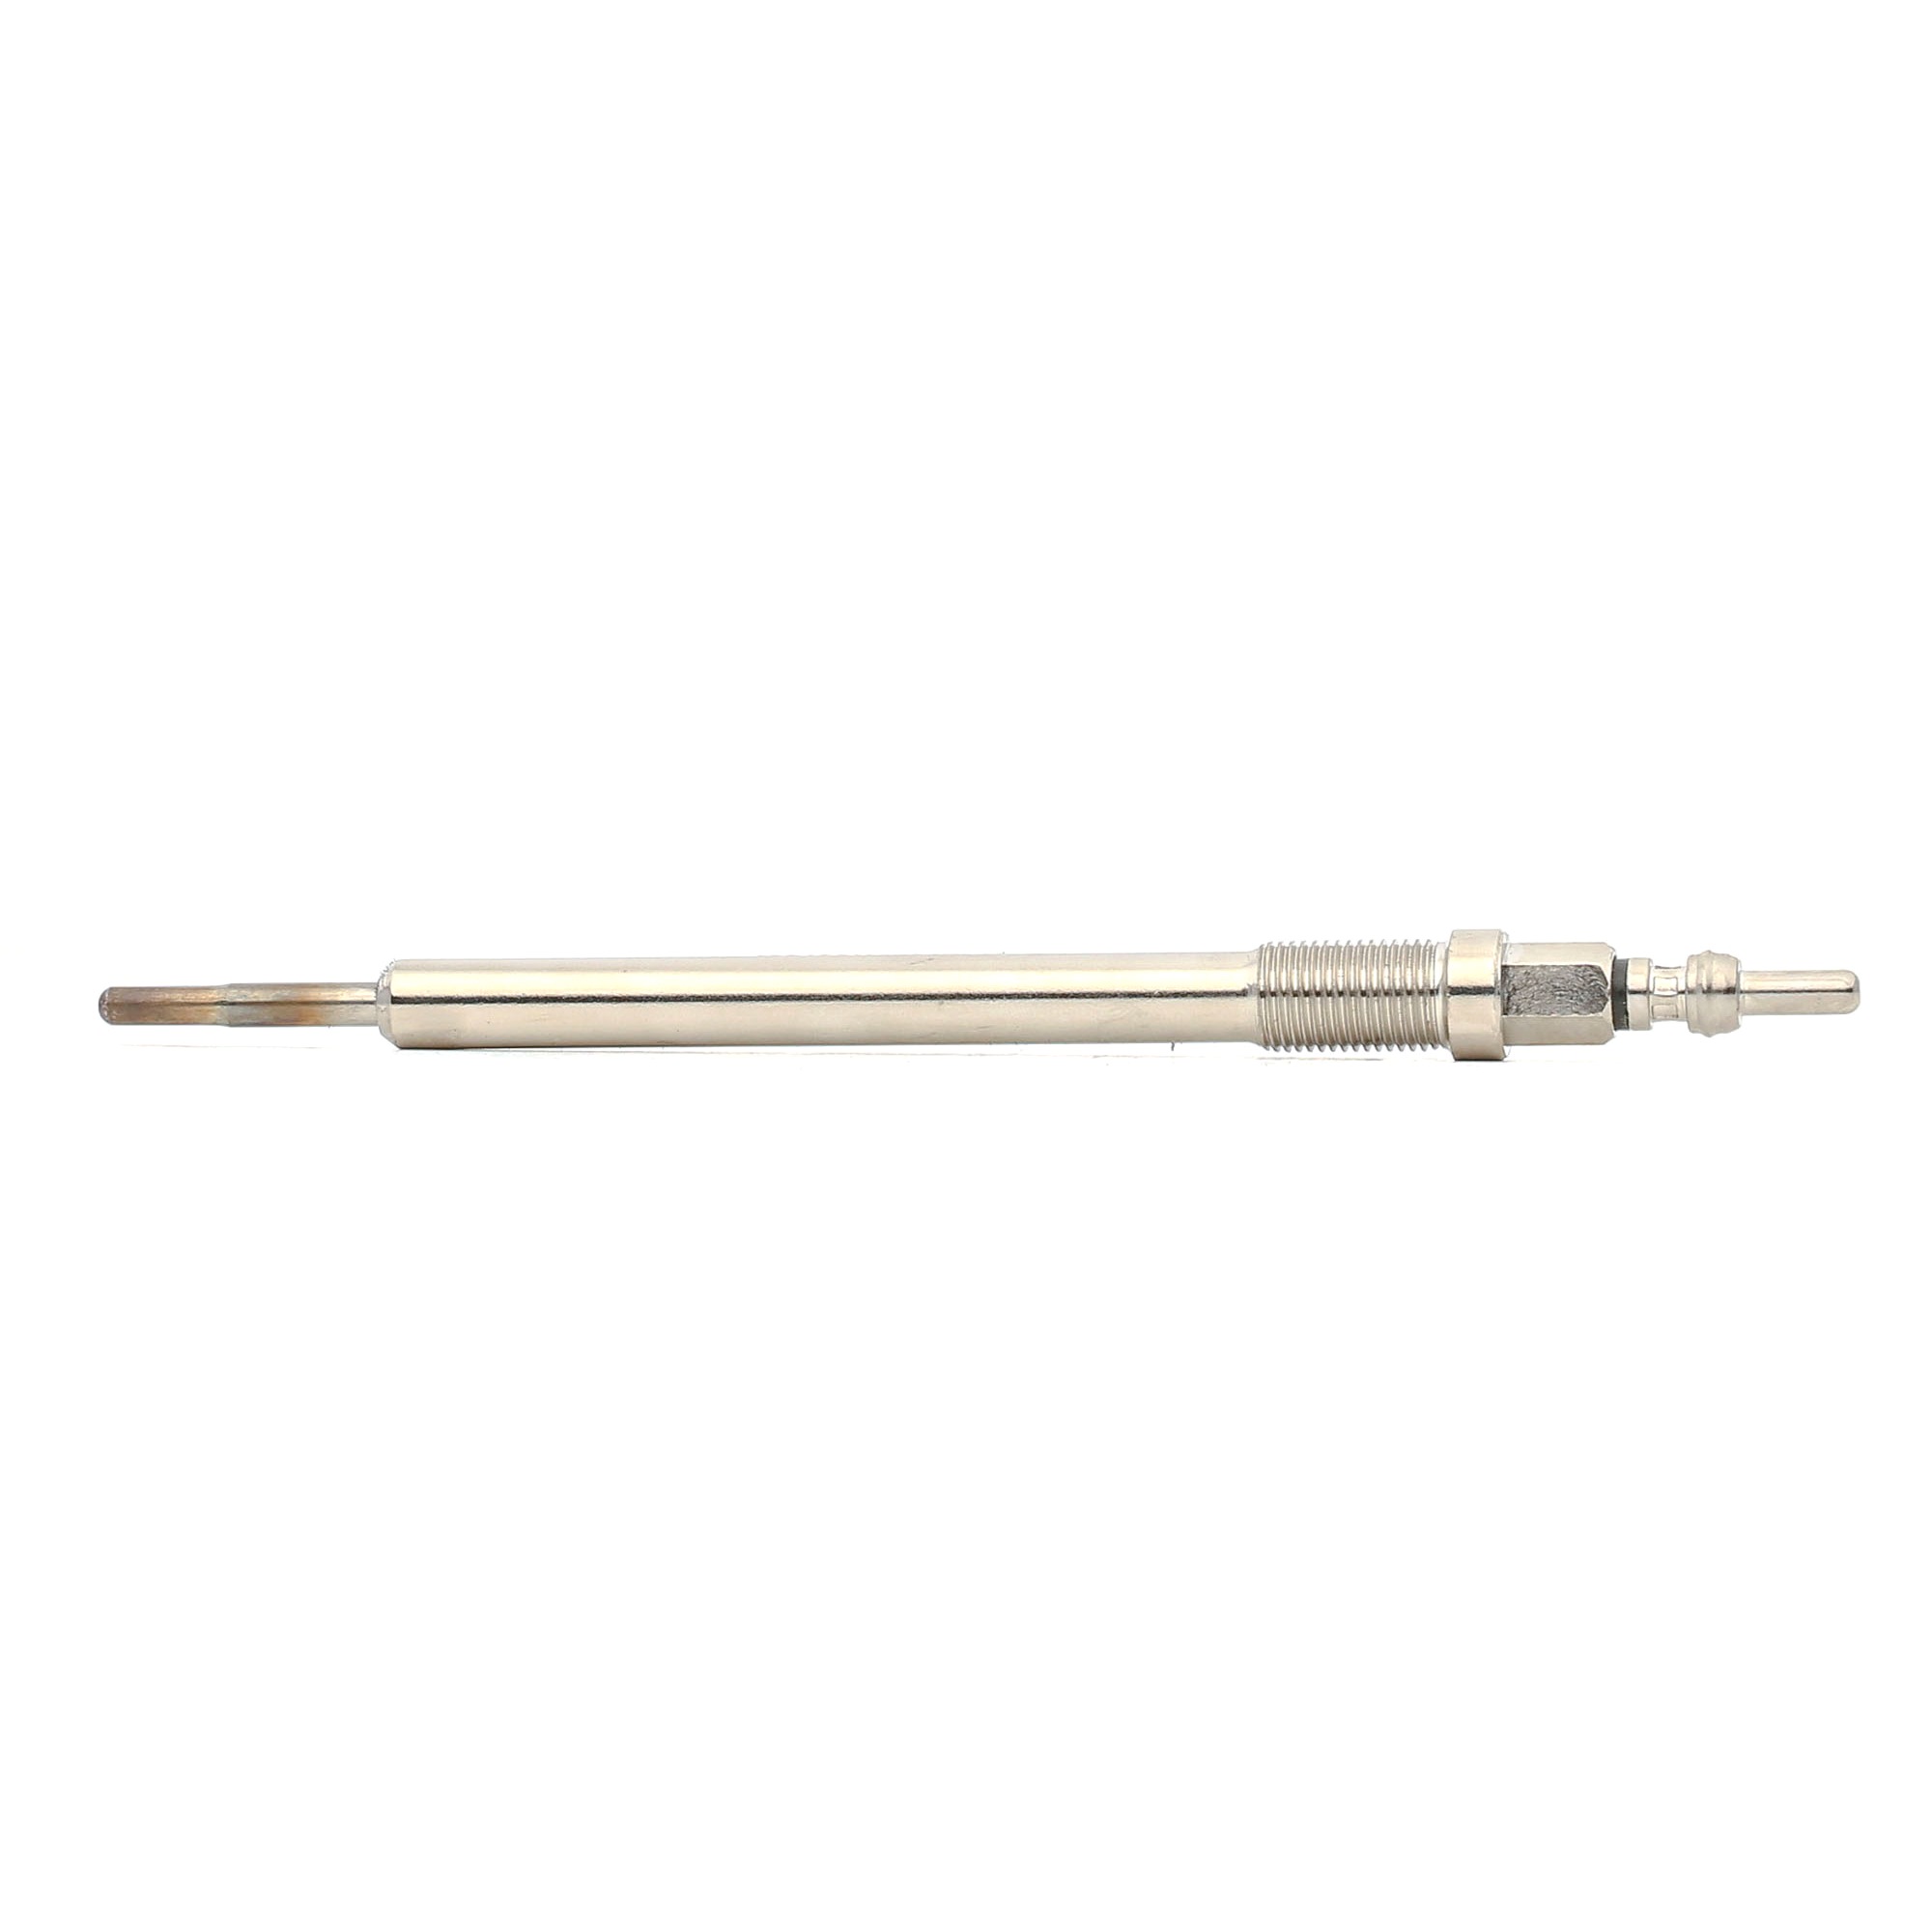 Buy Glow plug RIDEX 243G0129 - Ignition and preheating parts Mercedes Sprinter 907 online